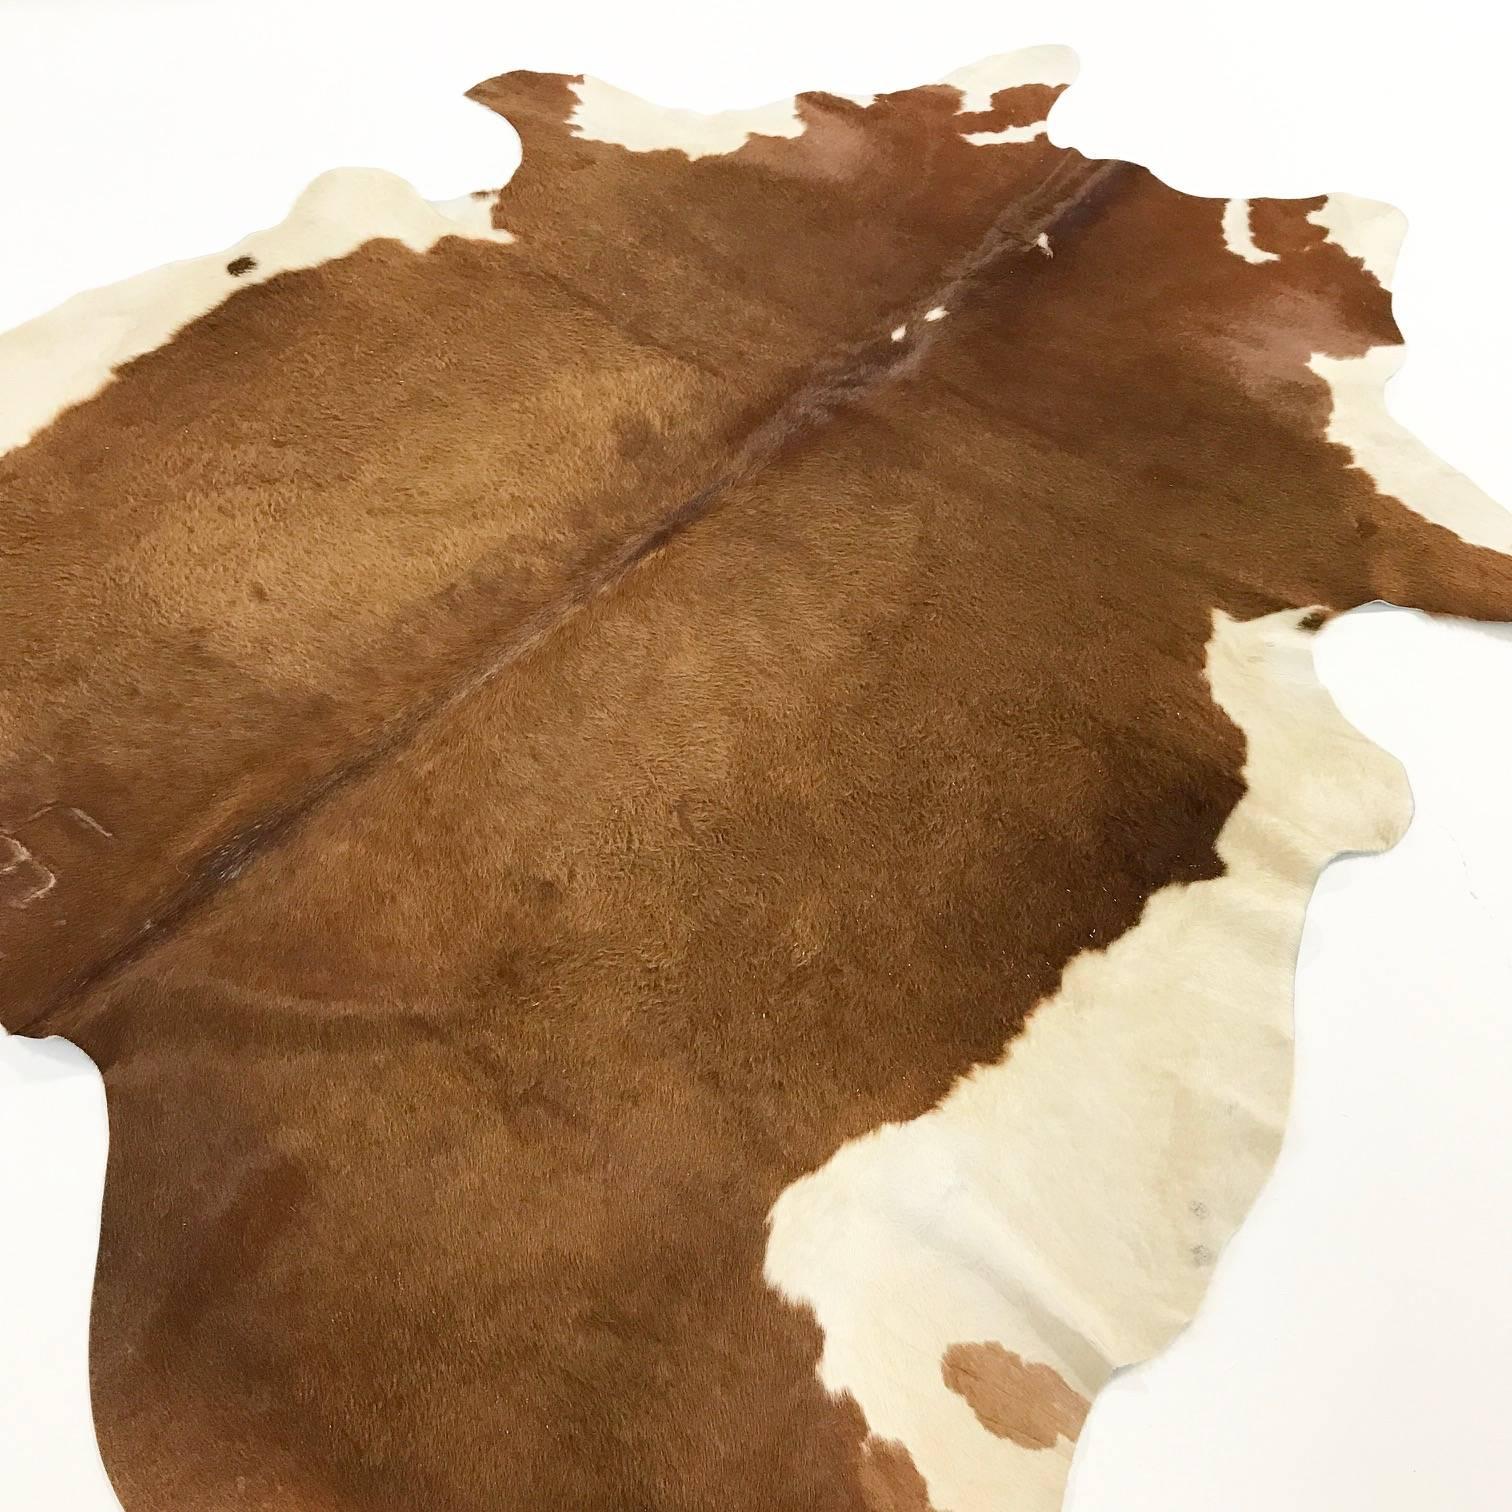 Cowhides are produced in many countries but it is universally known that the finest hair-on cowhides come from Brazil. Our cowhide rugs are produced in Brazil by one of the finest tanneries on earth. Using an expensive, time honored tanning process